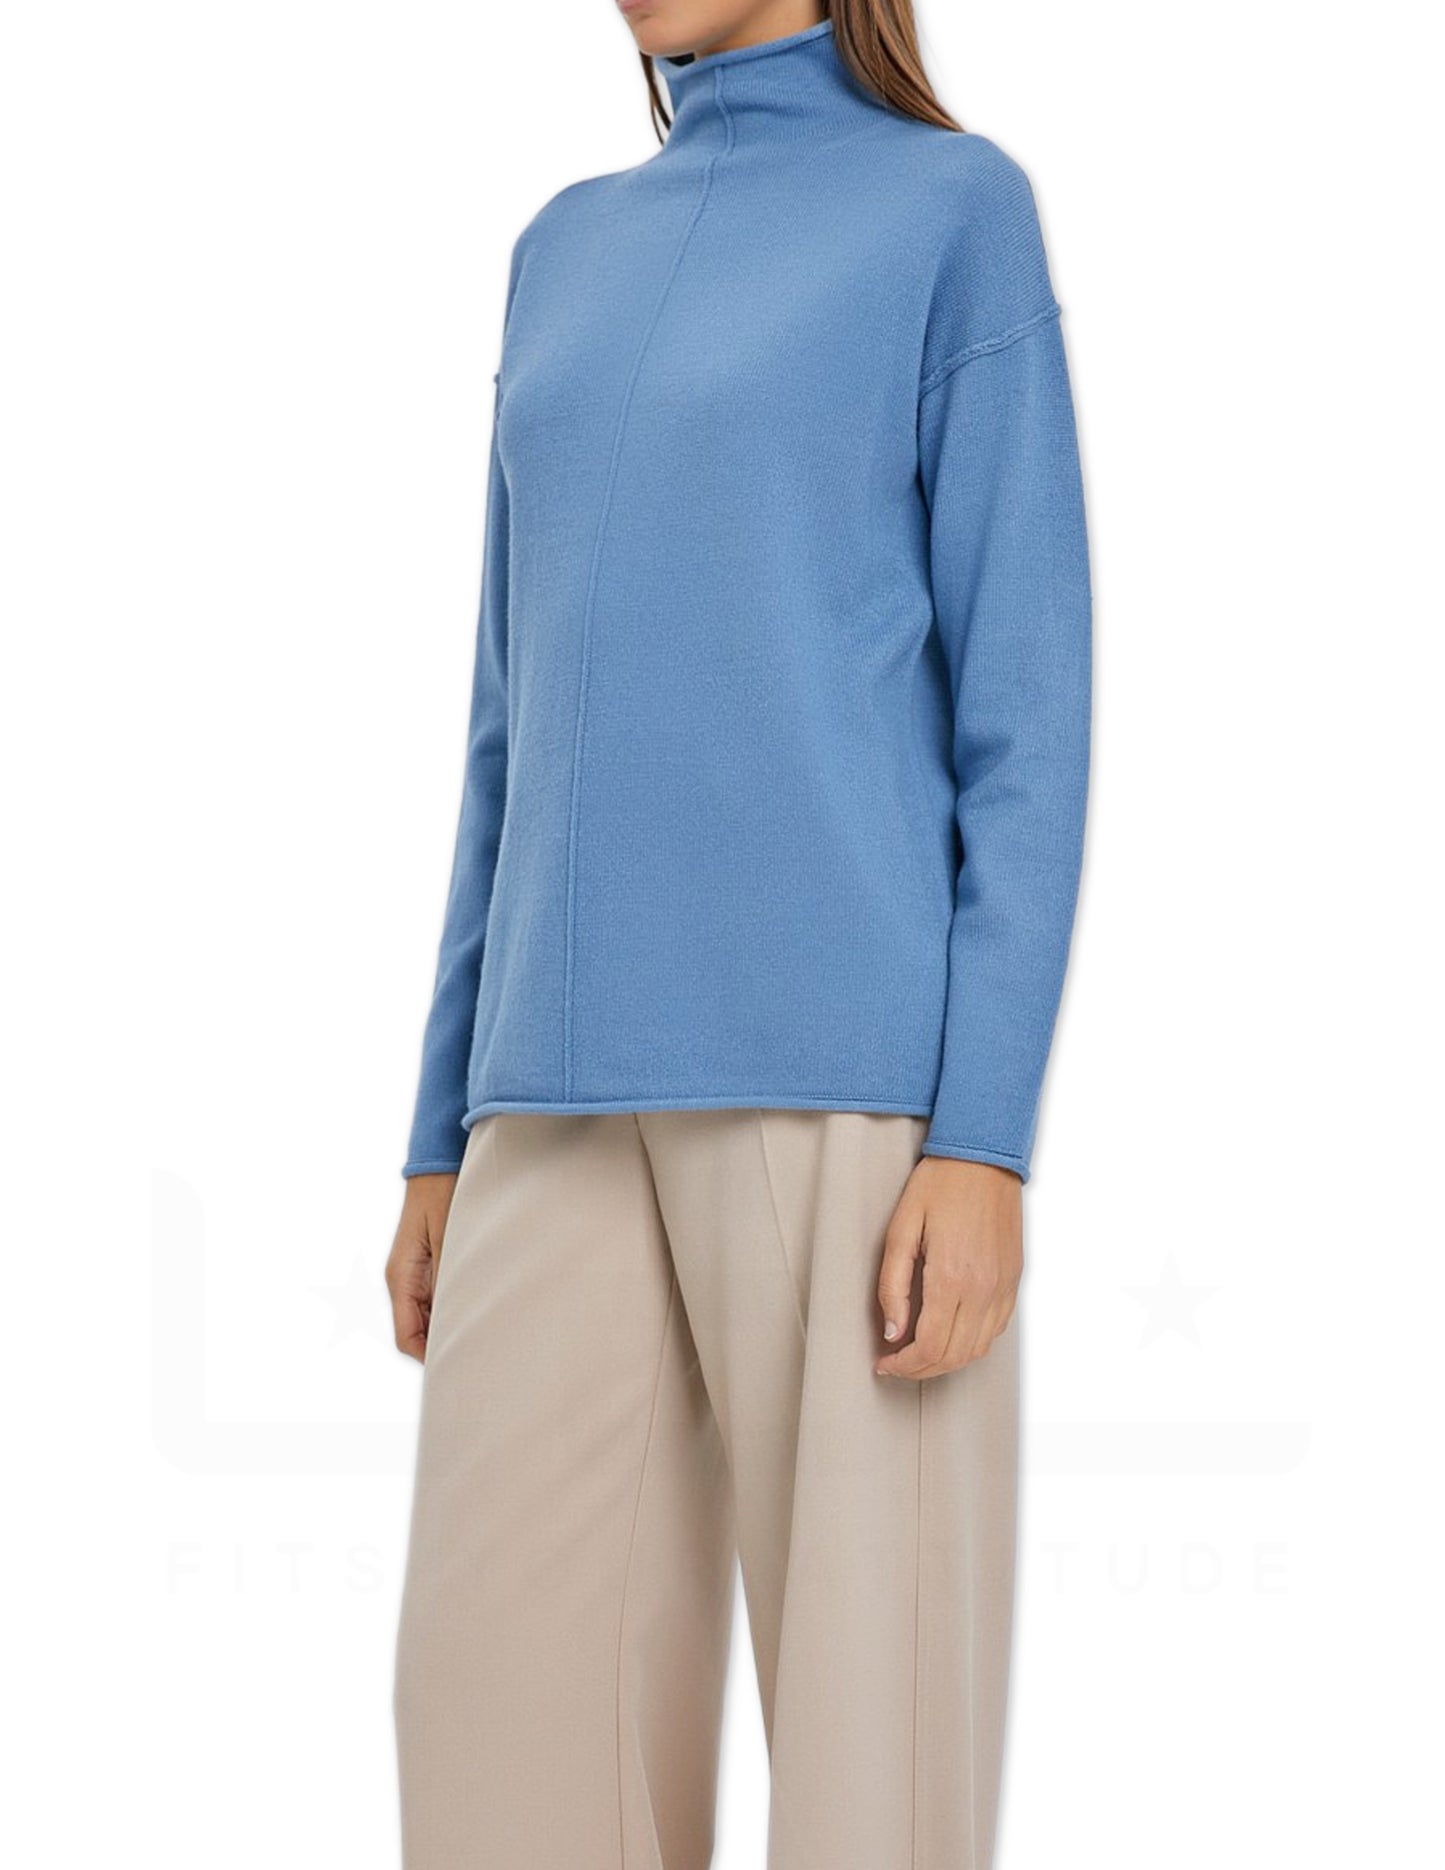 The Halle Sweater - Blue